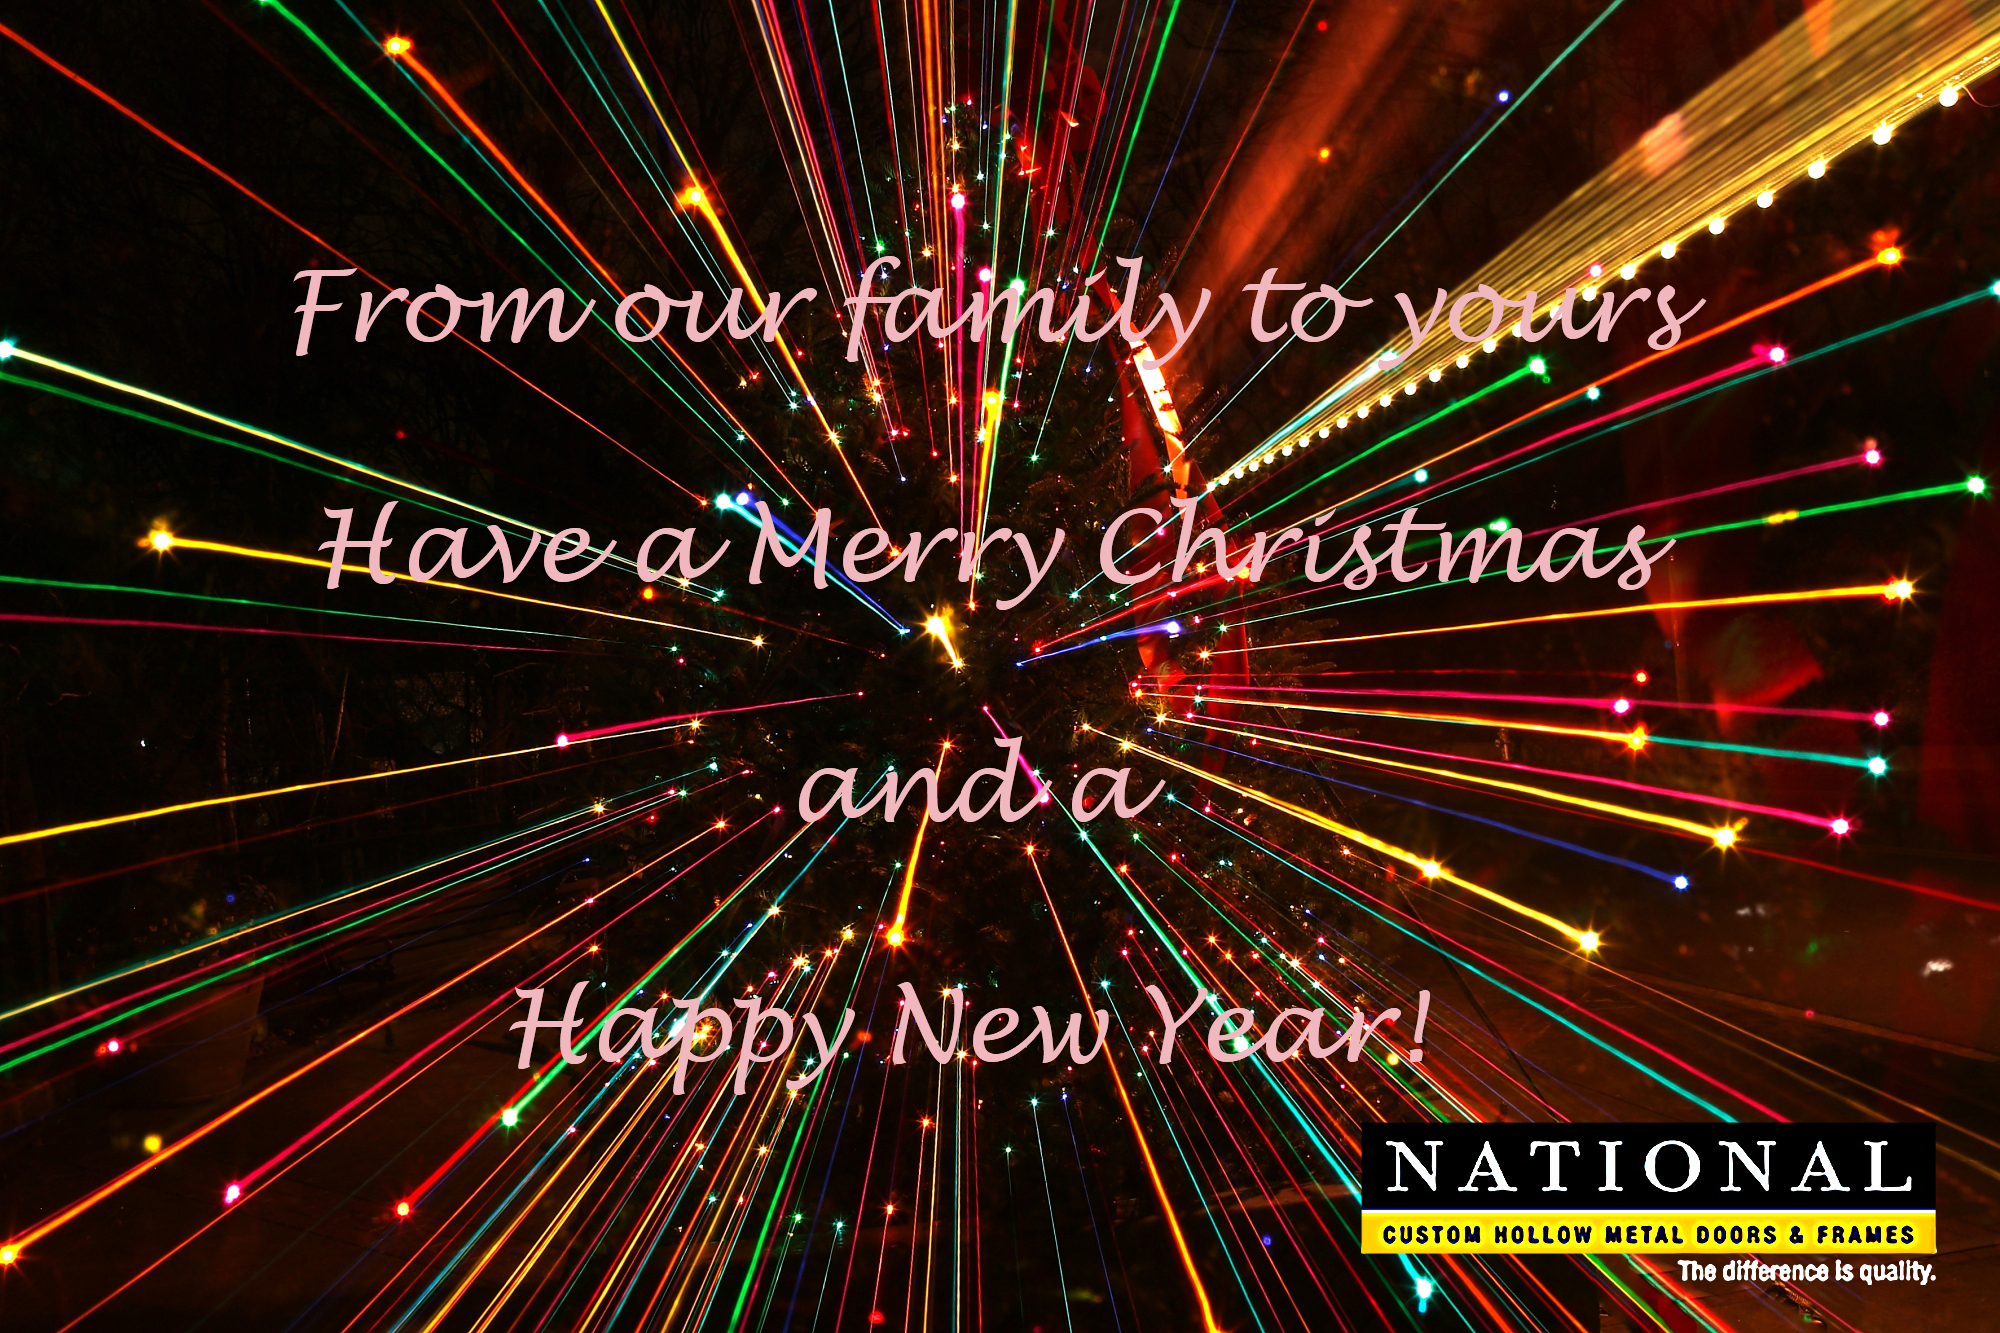 Merry Christmas from NCHM!